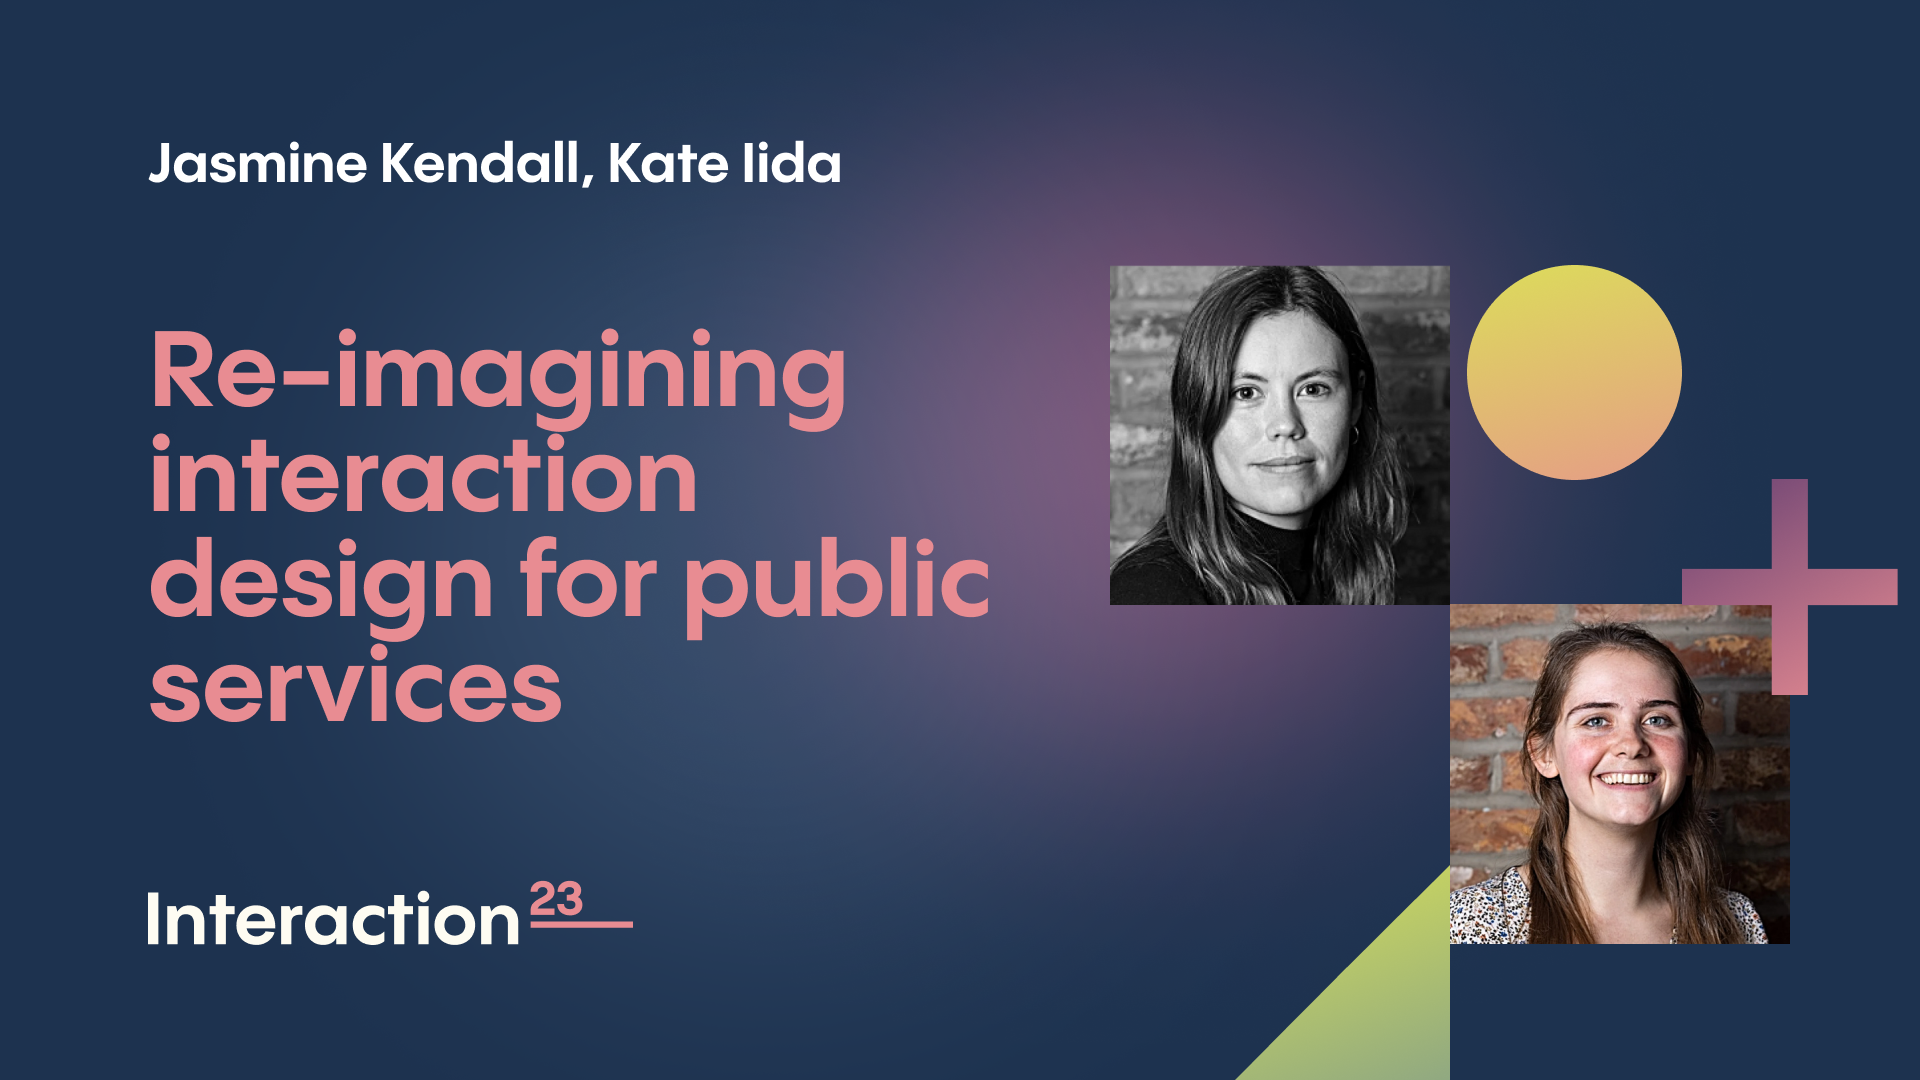 Re-imagining interaction design for public services